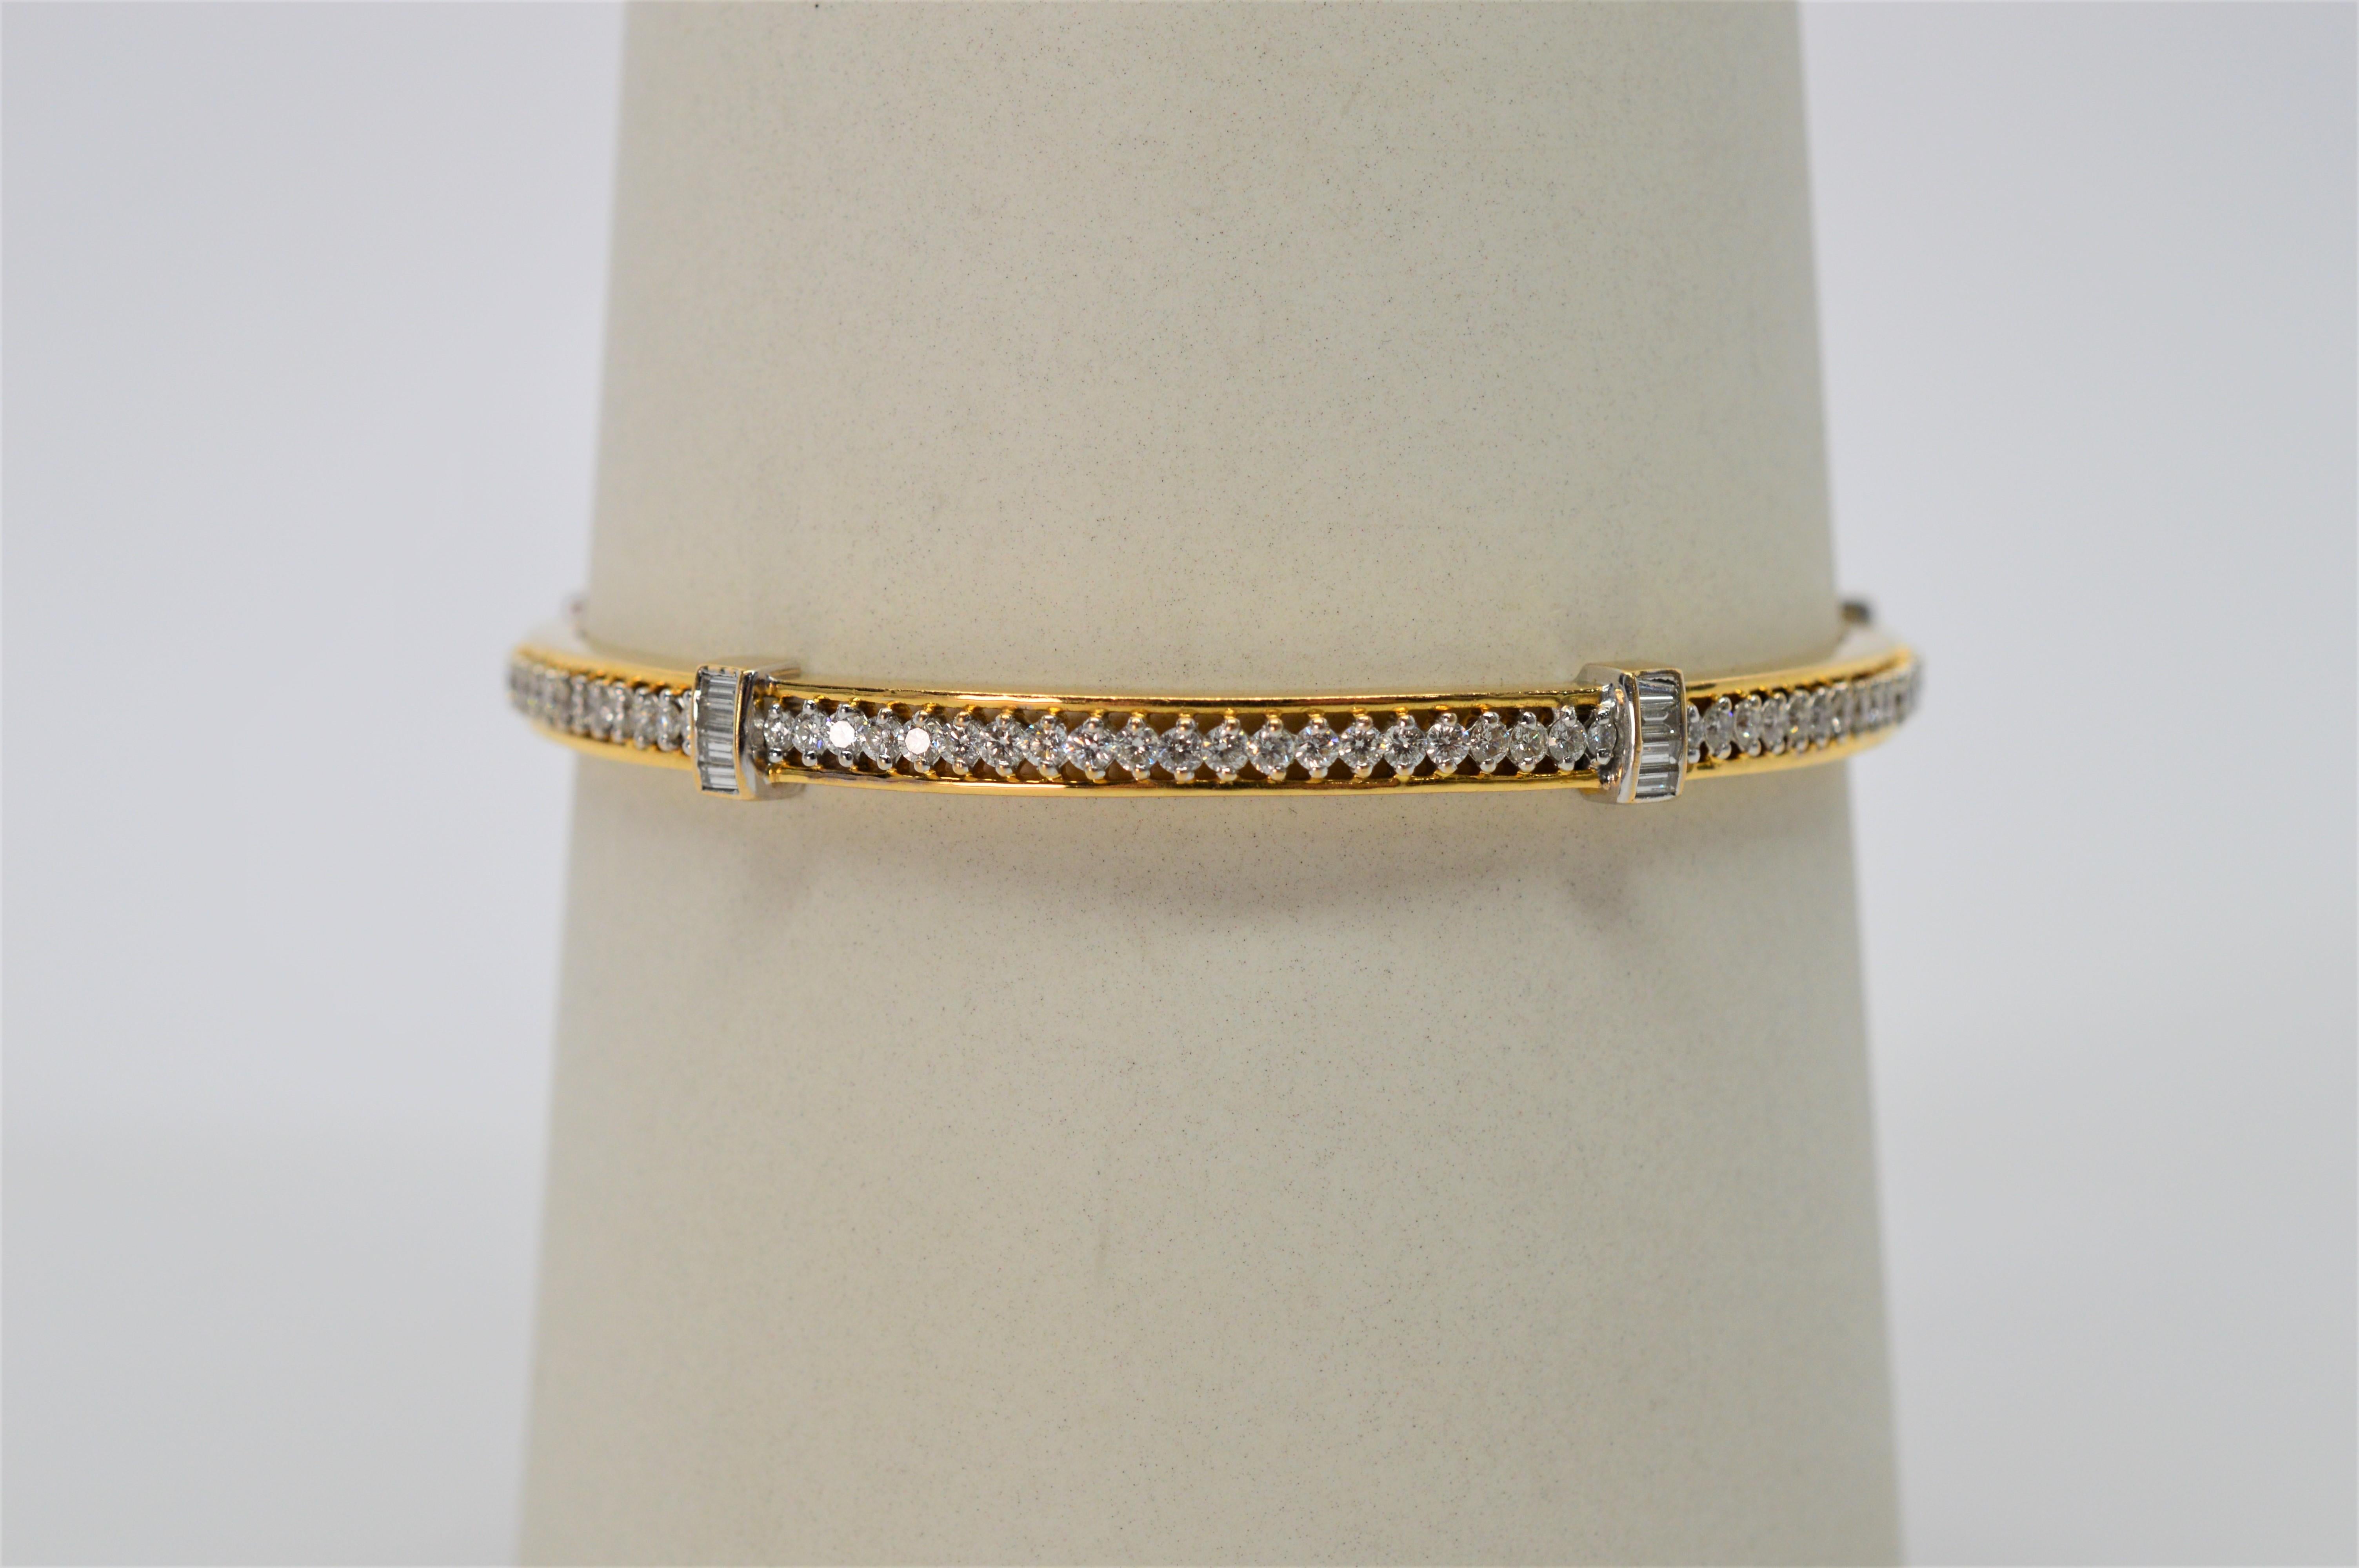 Over 3.5 carats of round H/VS diamonds encircle this 18 karat yellow gold bangle bracelet also featuring five mounted baguette-cut diamond stations. Handcrafted on the sub-continent of India and tastefully designed to wear alone or stacked with